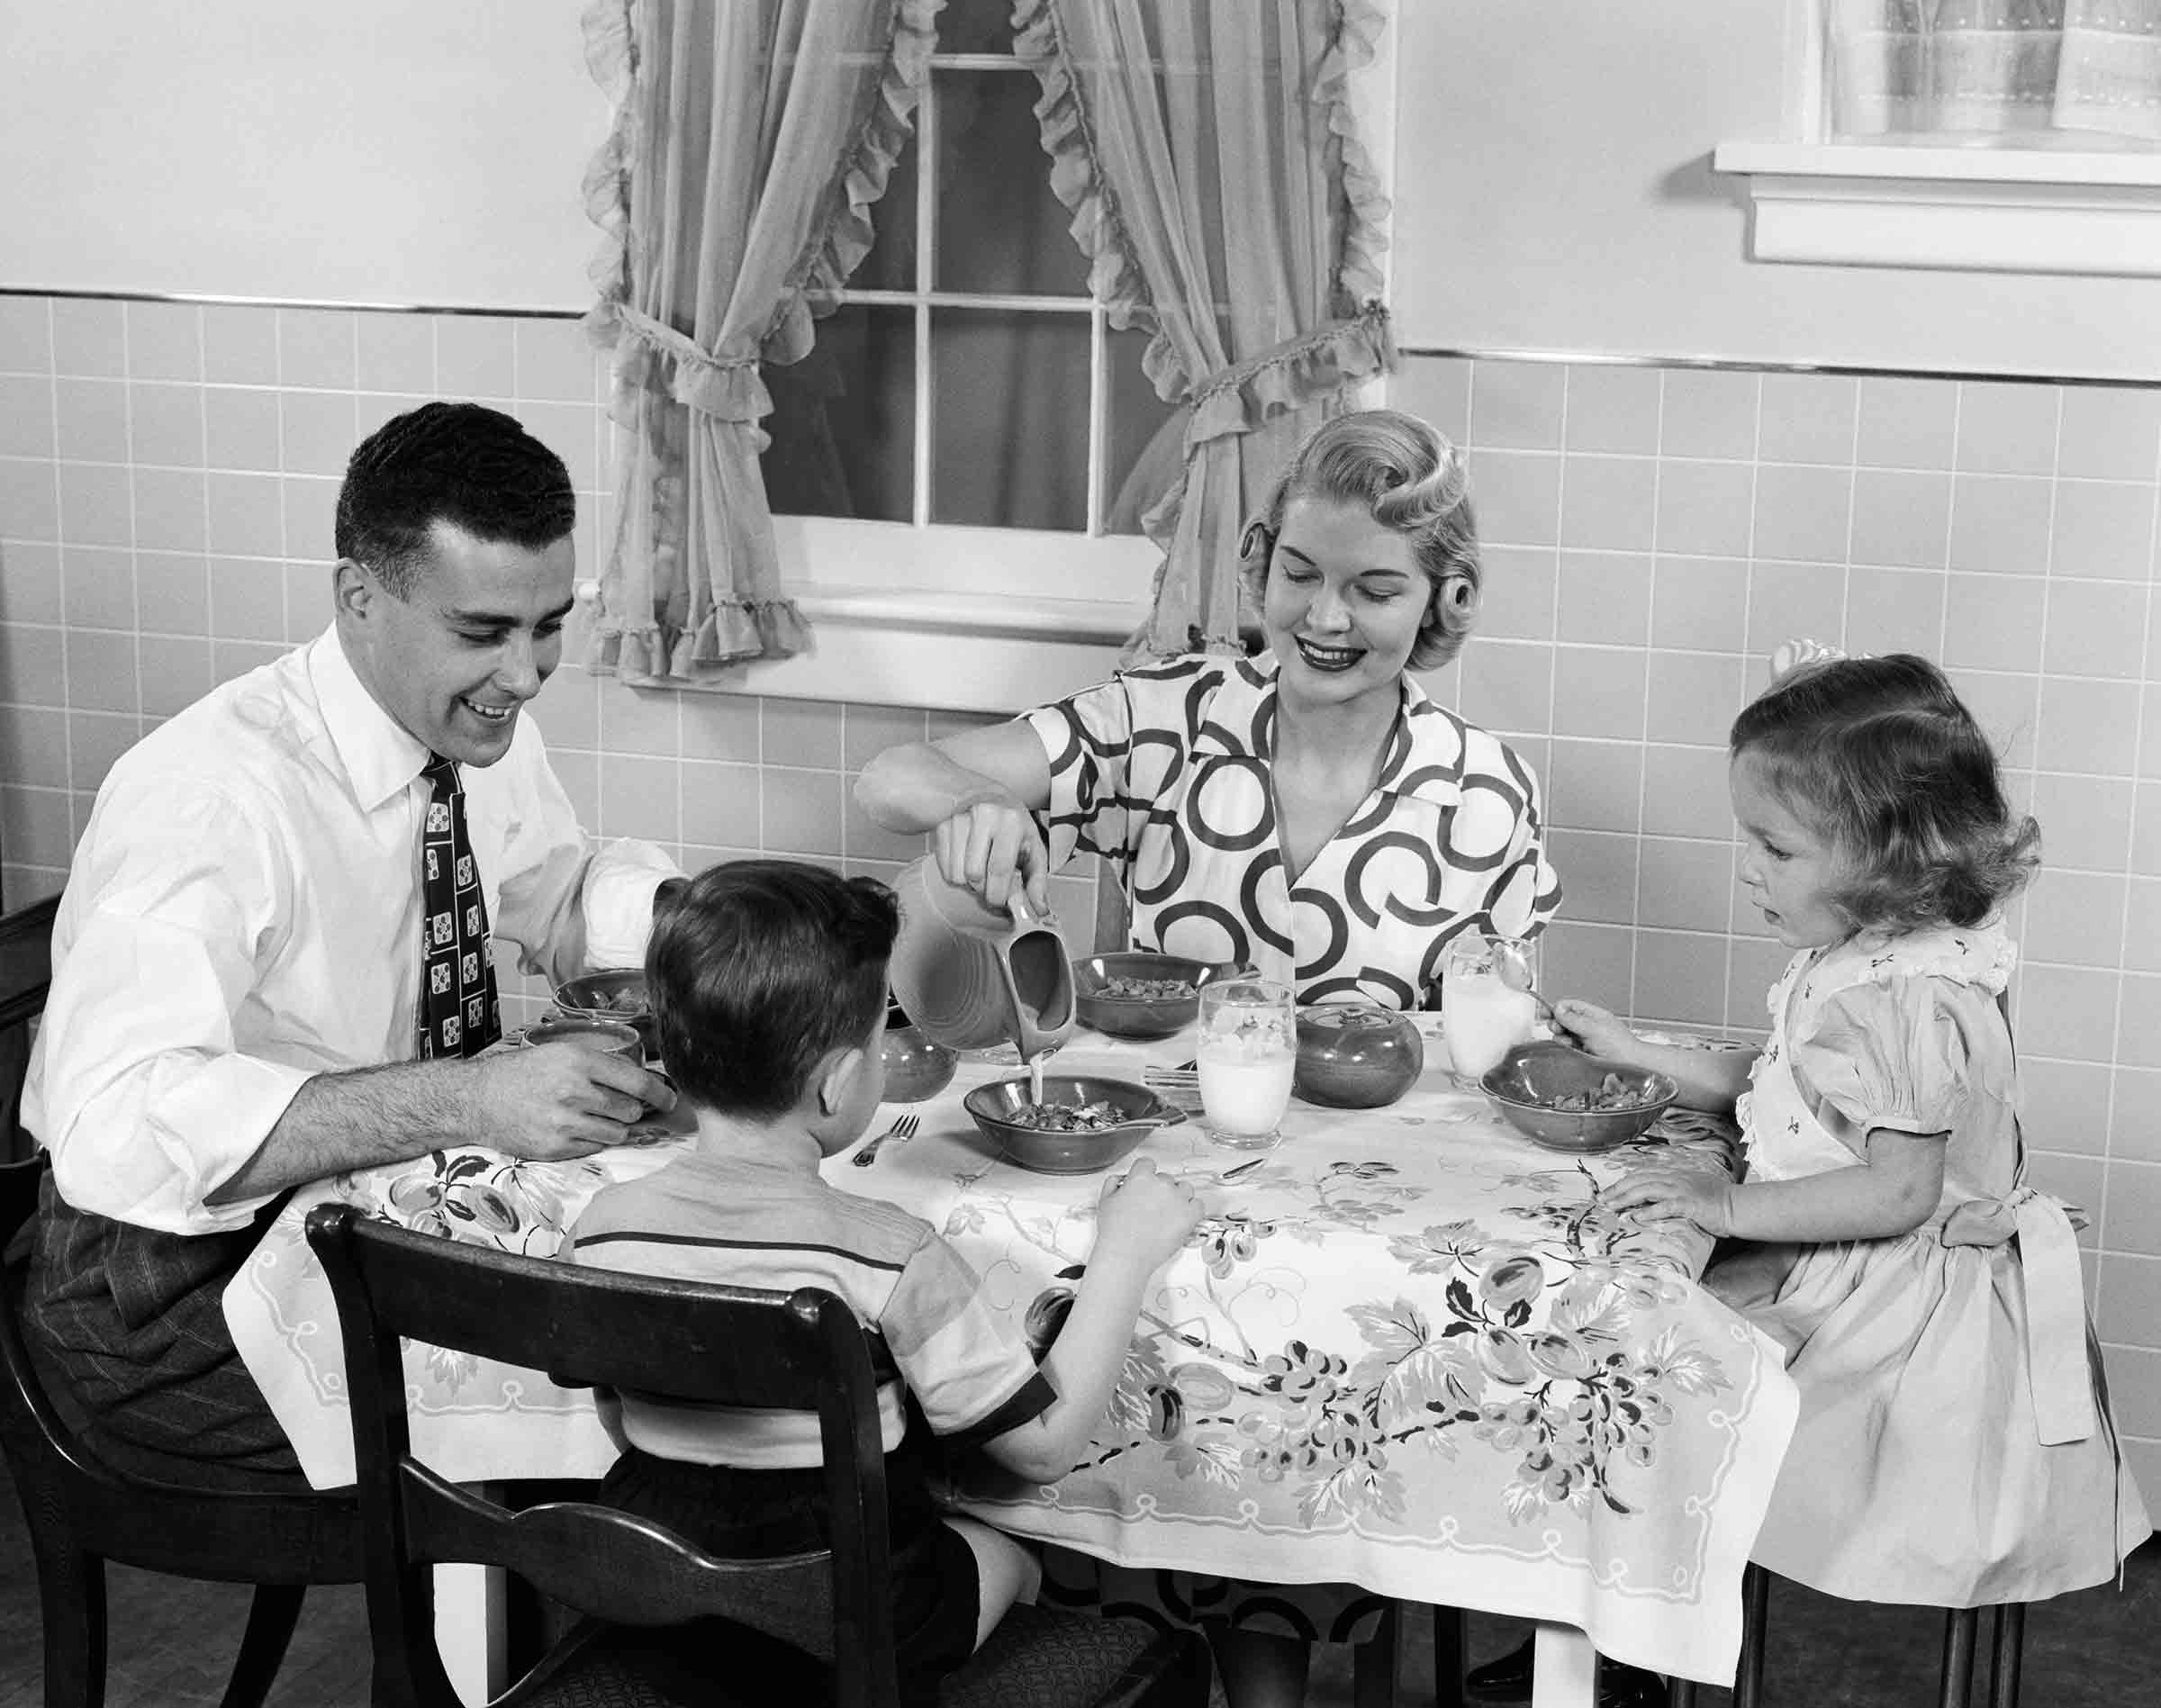 “Breakfast is a reminder that any good family meal is not about the food anyway,” says therapist Anne Fishel. (Getty Images)